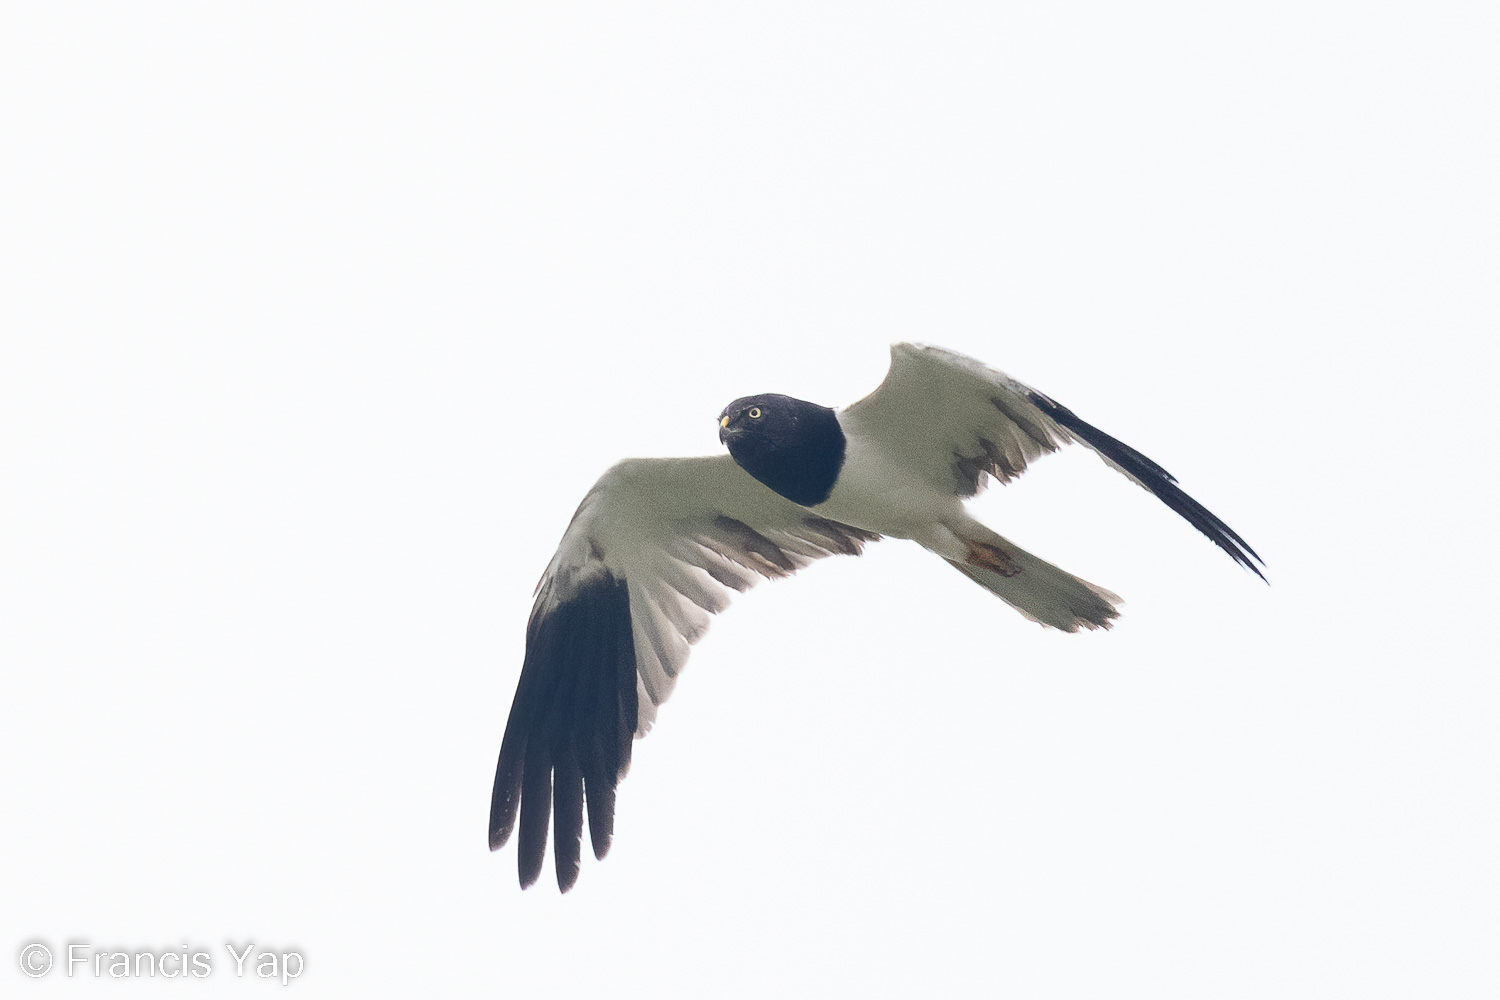 Pied Harrier at Tuas South on 02 Nov 2022. Photo credit: Francis Yap